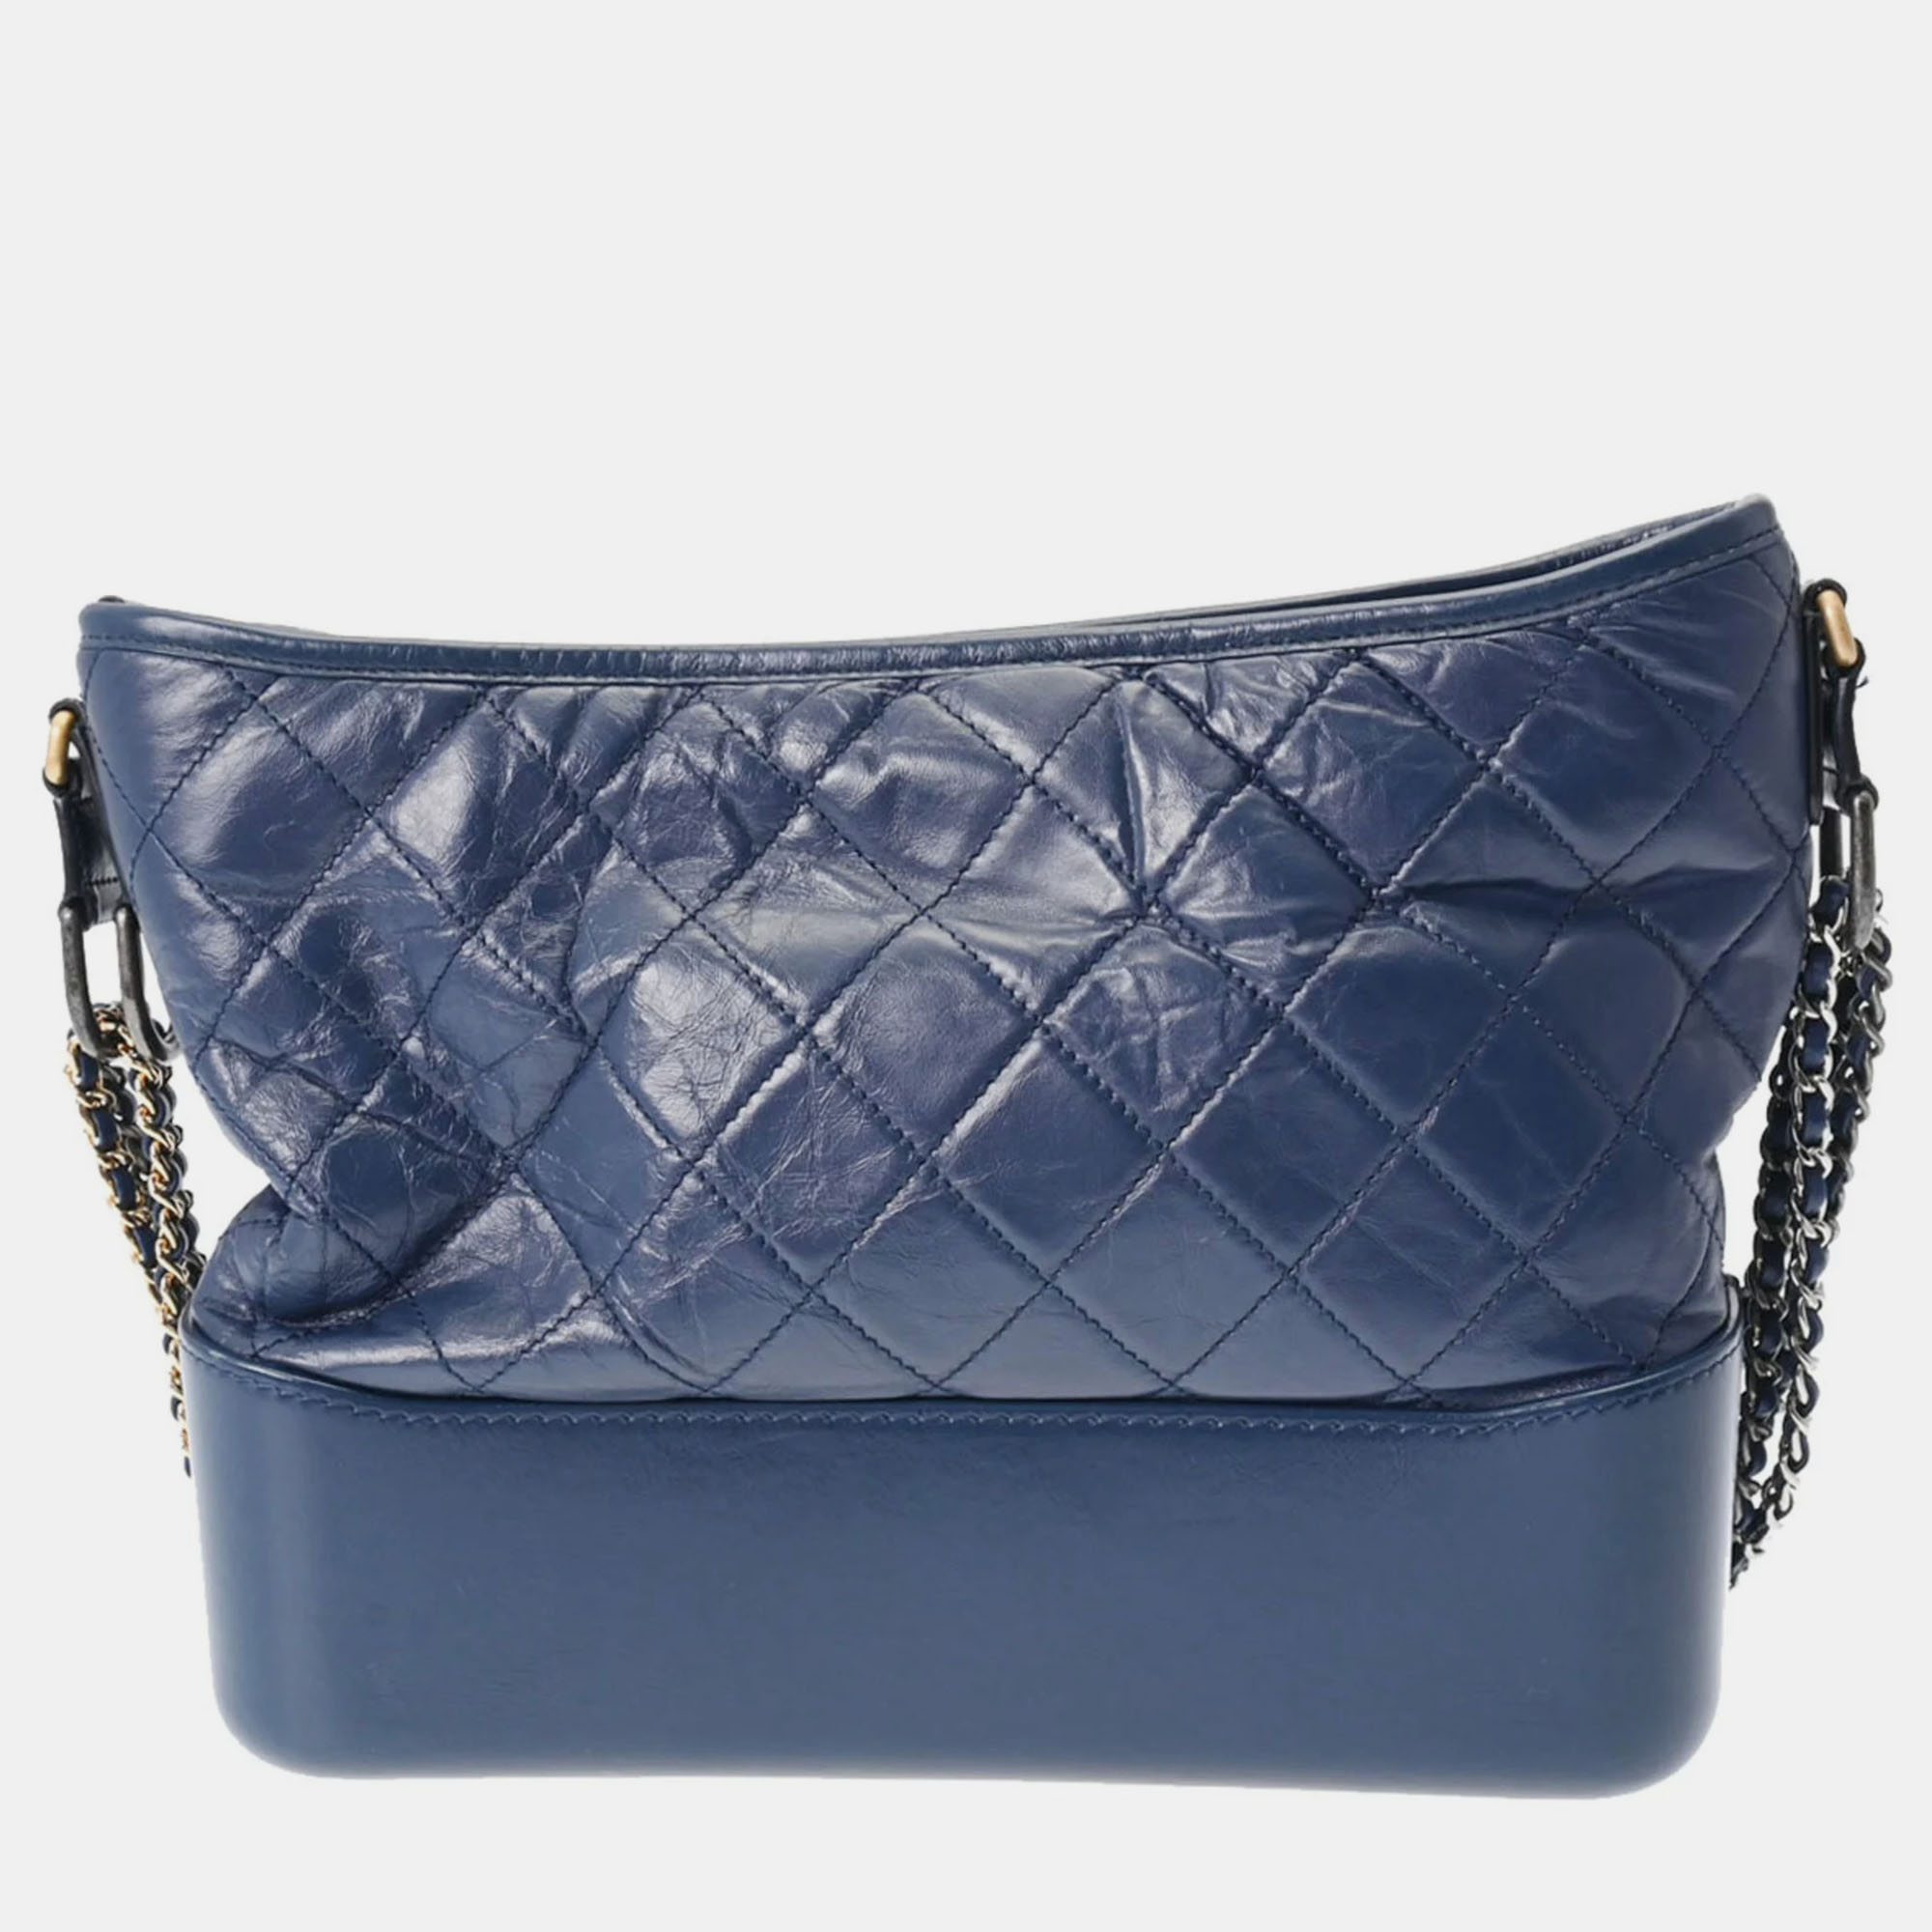 Chanel blue leather large gabrielle hobo bag